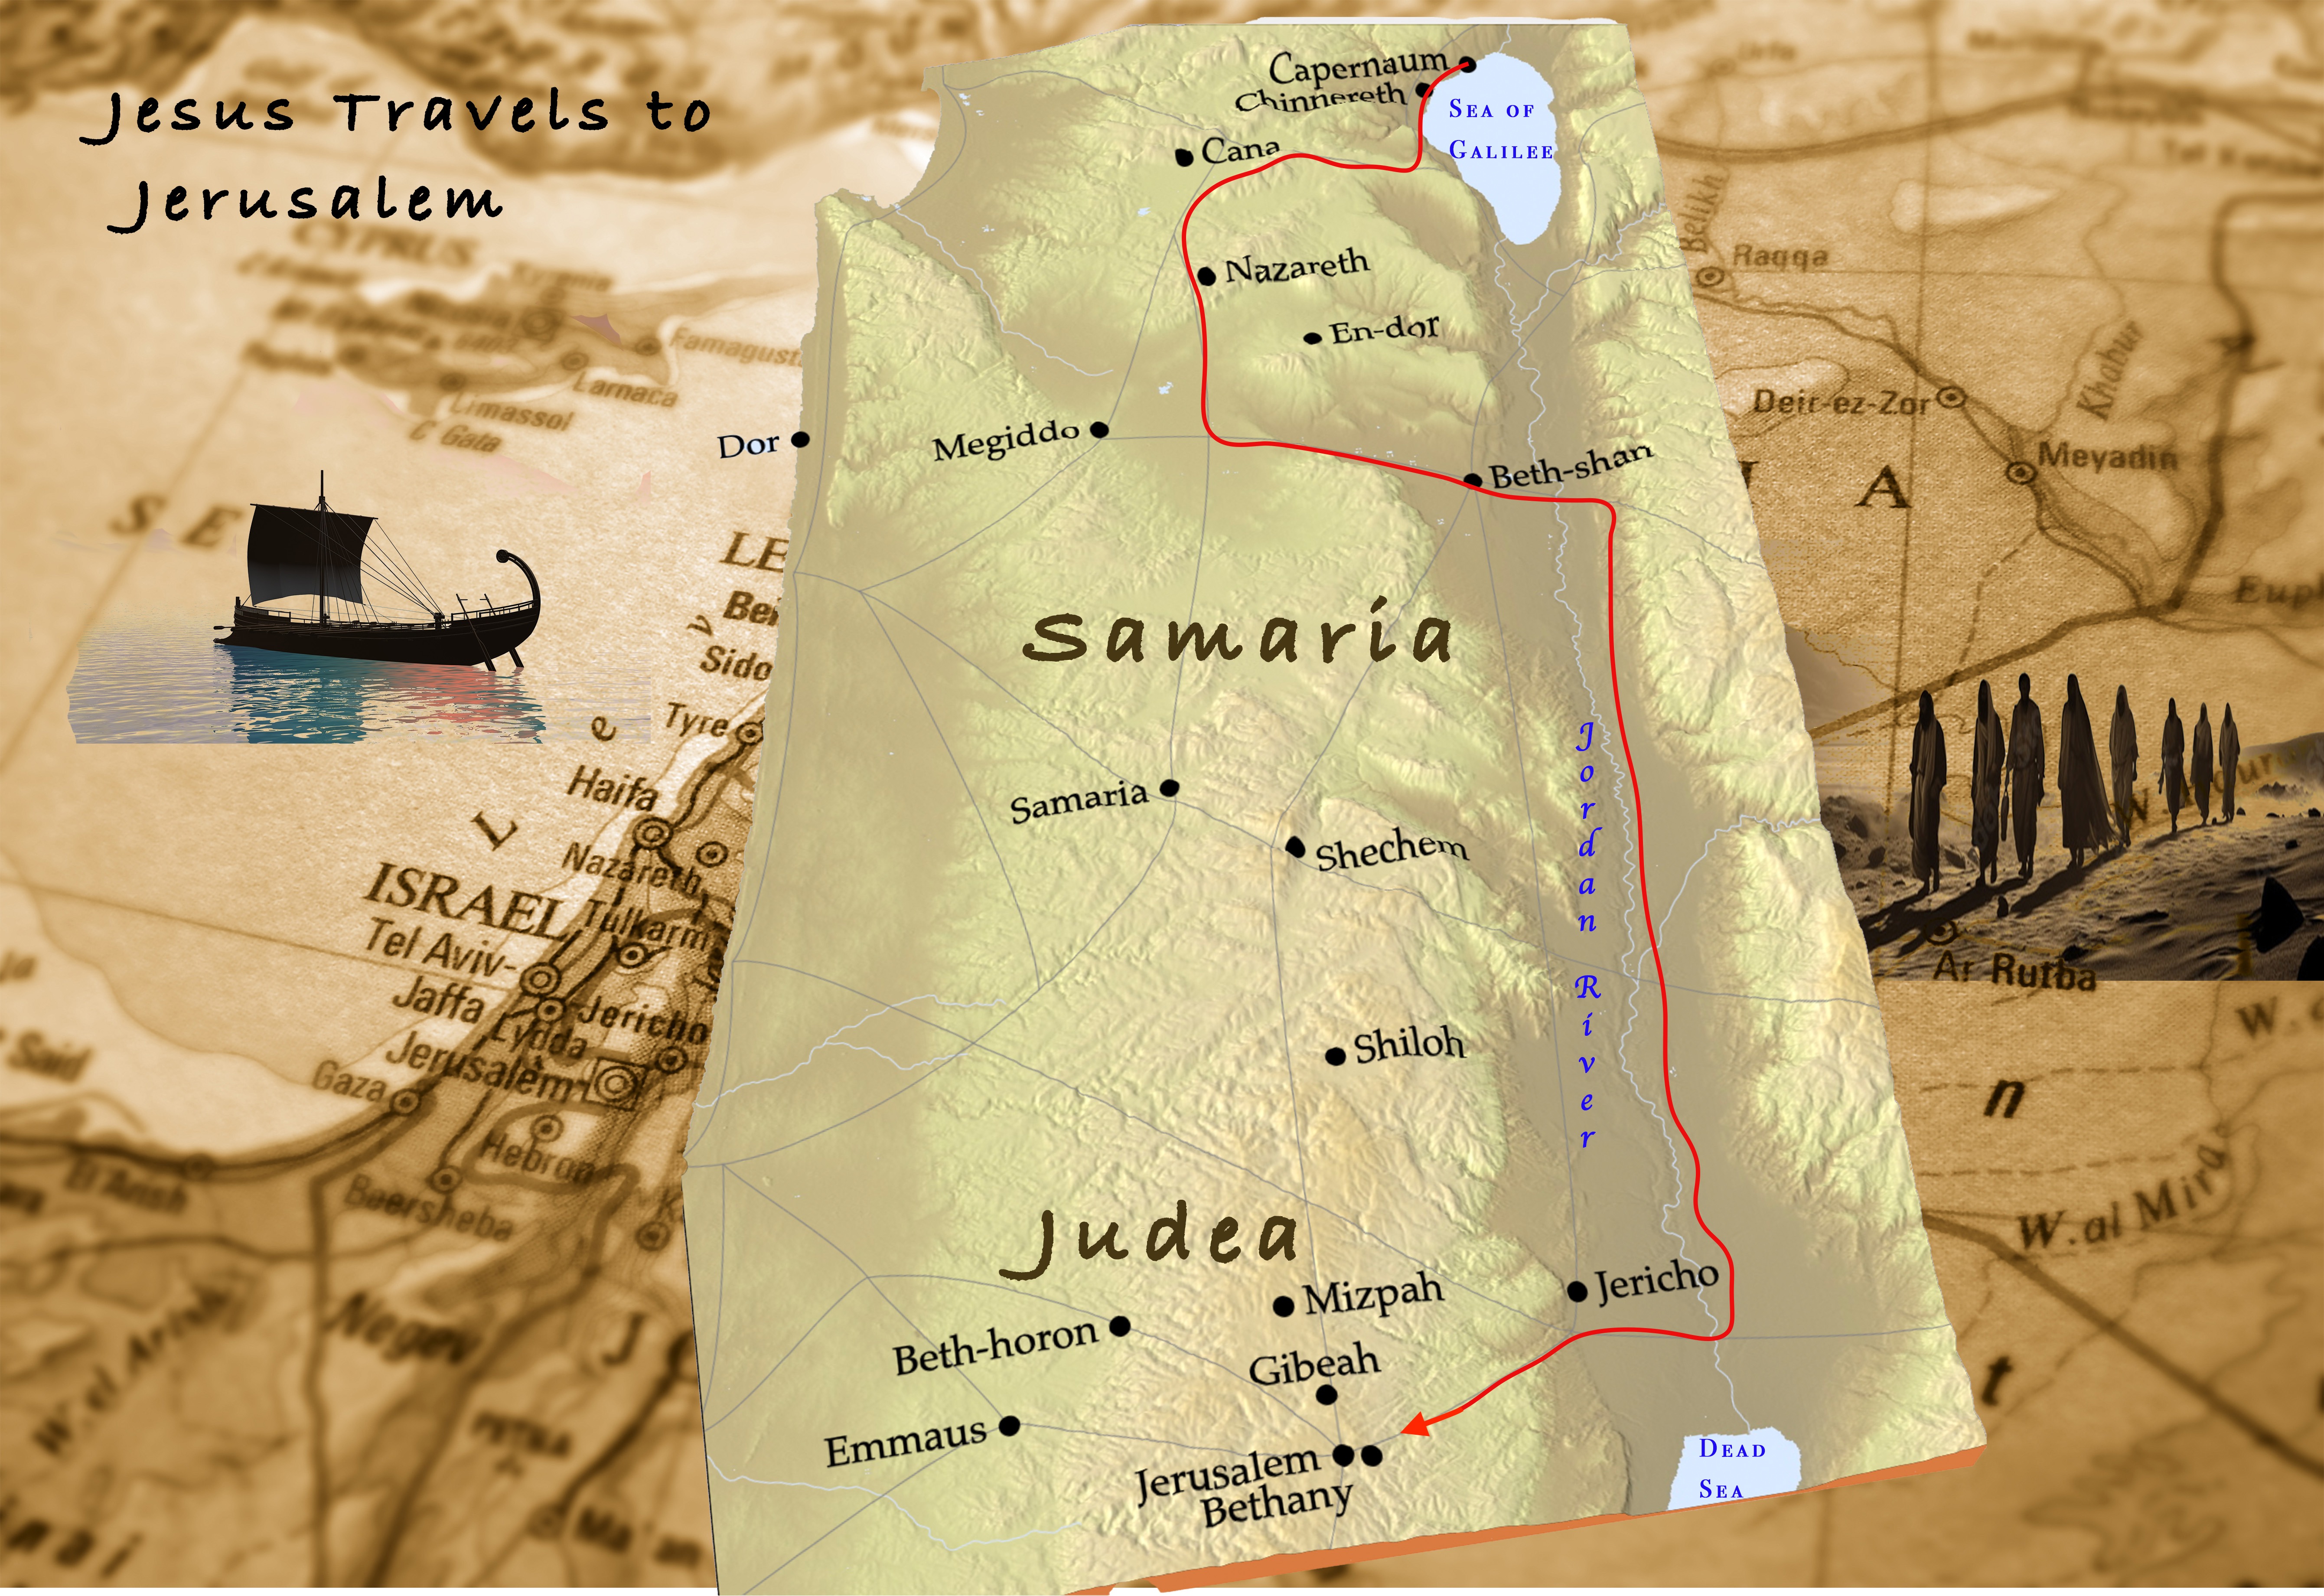 The route Jews took to Jerusalem avoiding Samaria. Jesus travelled this route, as well as the route that went through Samaria. He encountered the woman at the well on a trip back from Jerusalem.